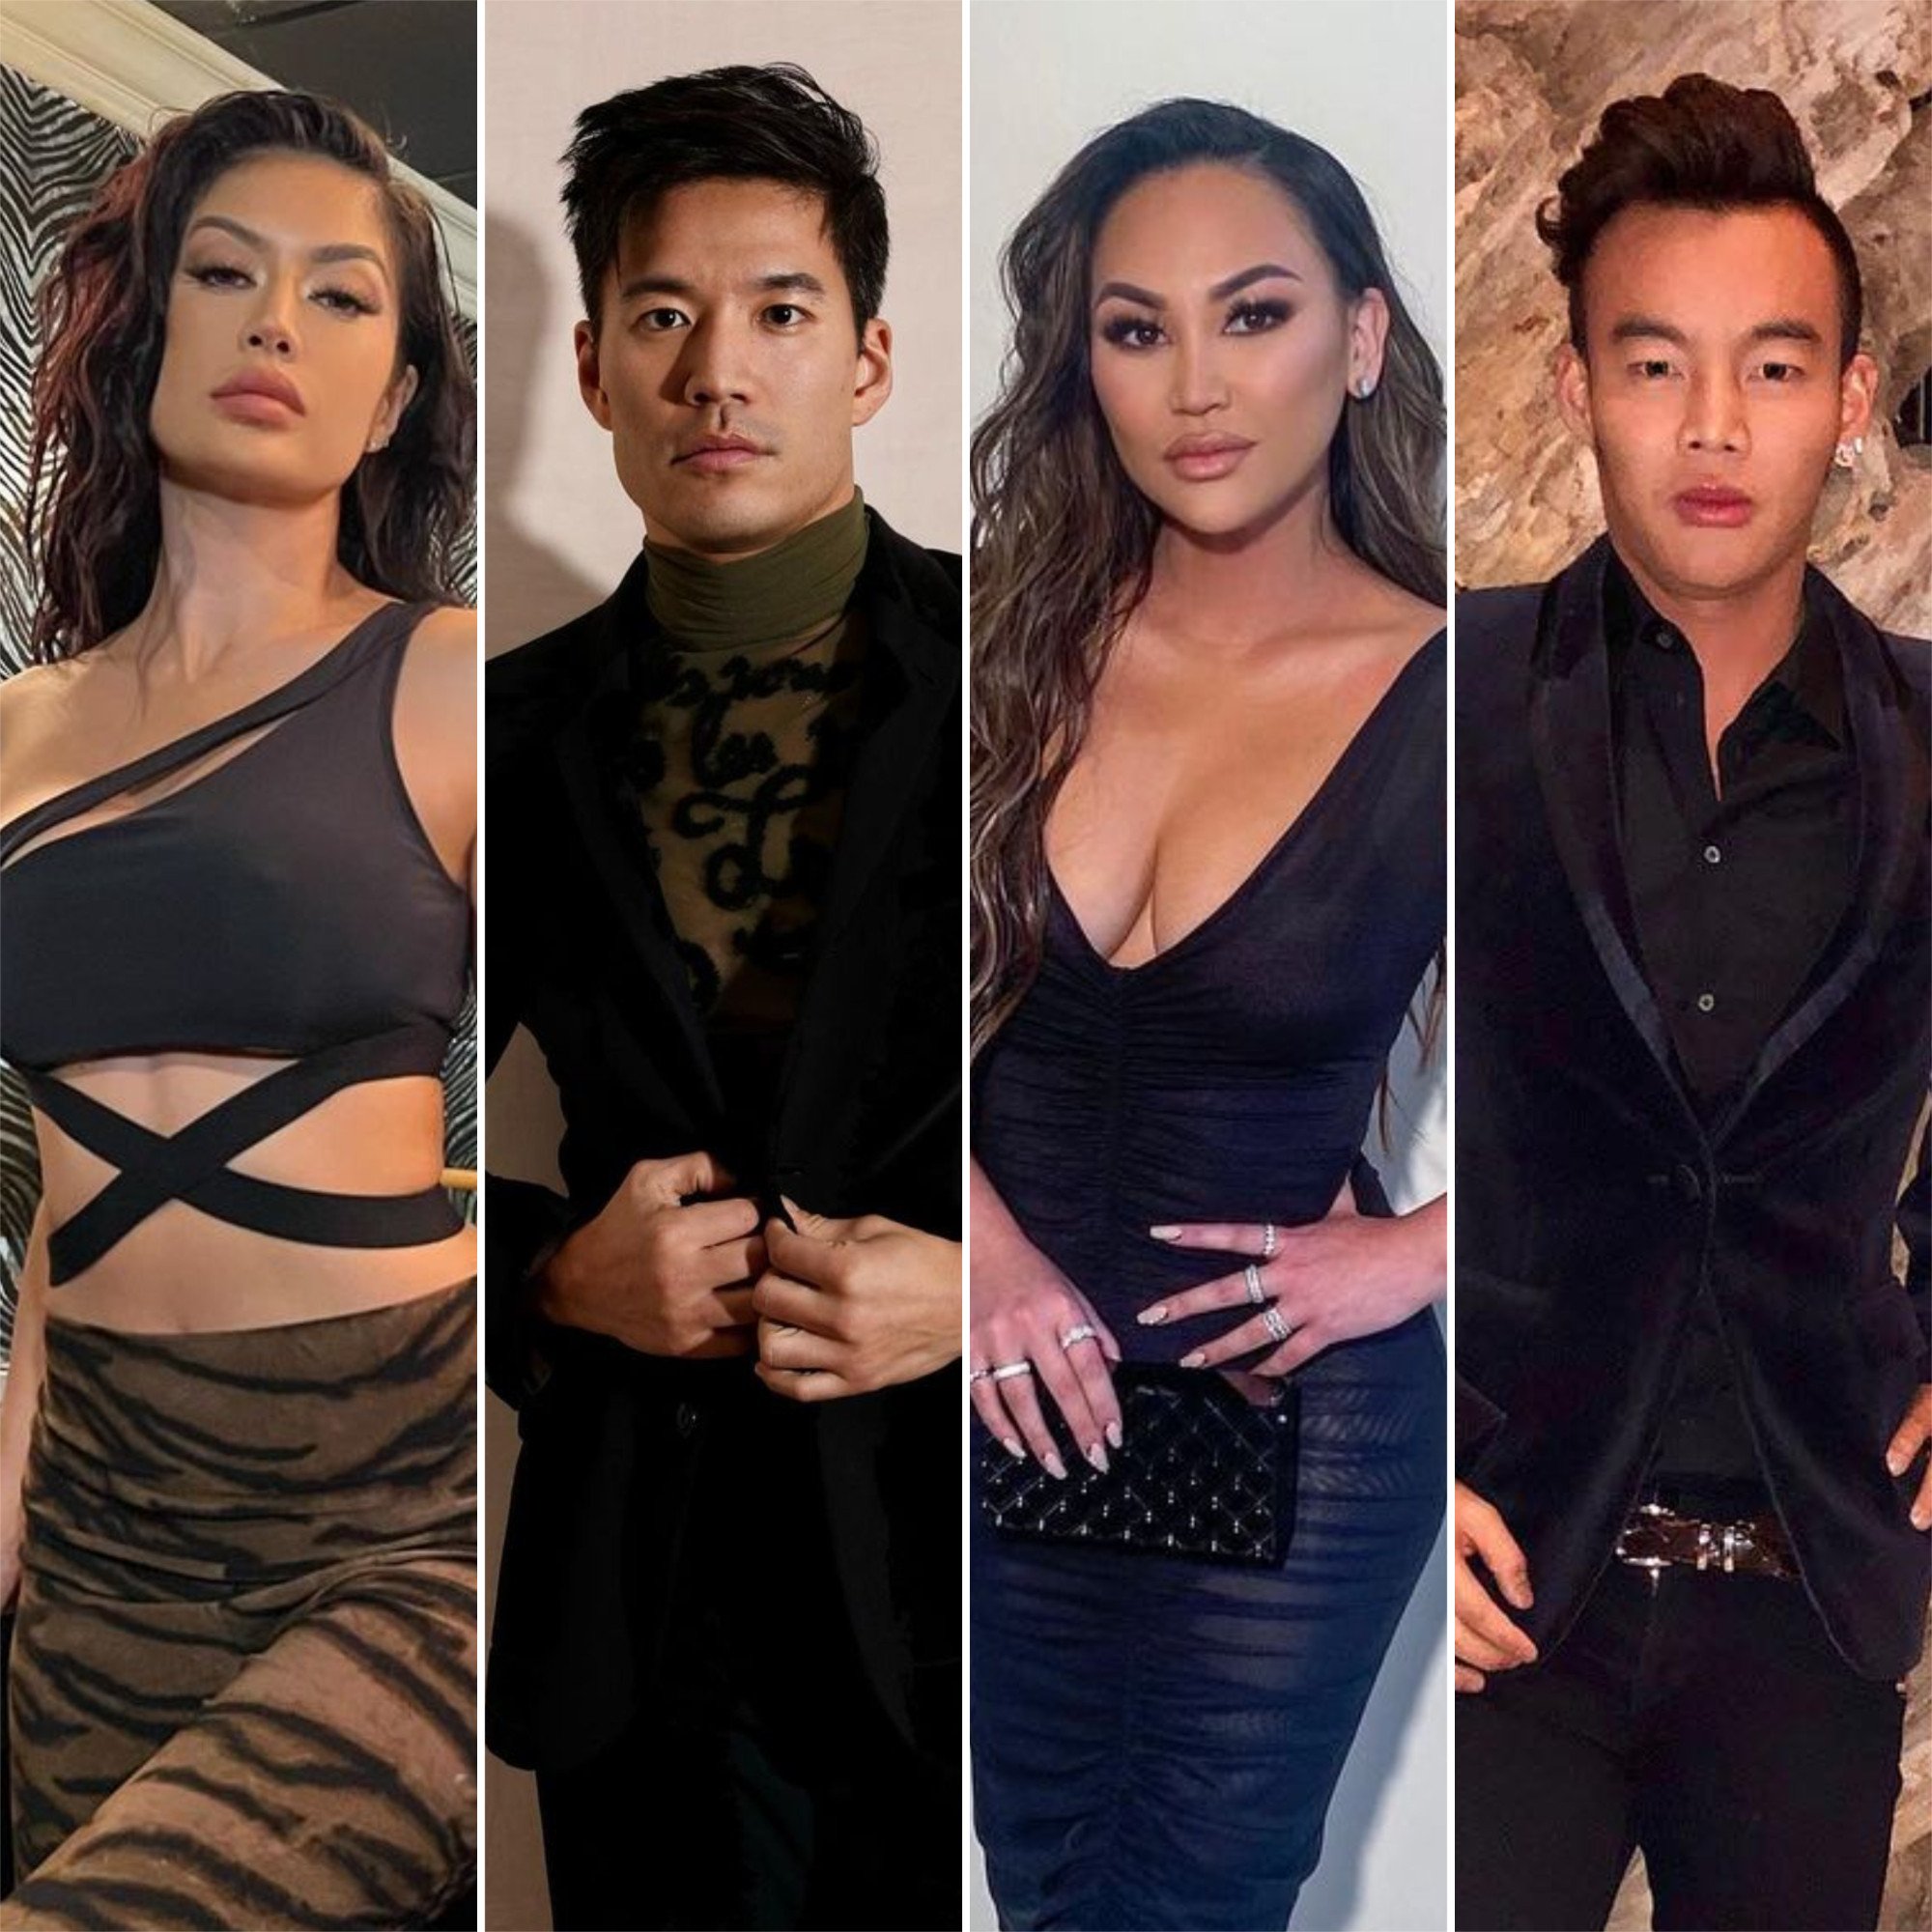 Mi casa, su casa: who has the most welcoming and fabulous home of the Bling Empire cast – Kim Lee, Kevin Kreider, Dorothy Wang or Kane Lim? Photos: @kimlee, @kevin.kreider, @dorothywang, @kanelk_k/Instagram